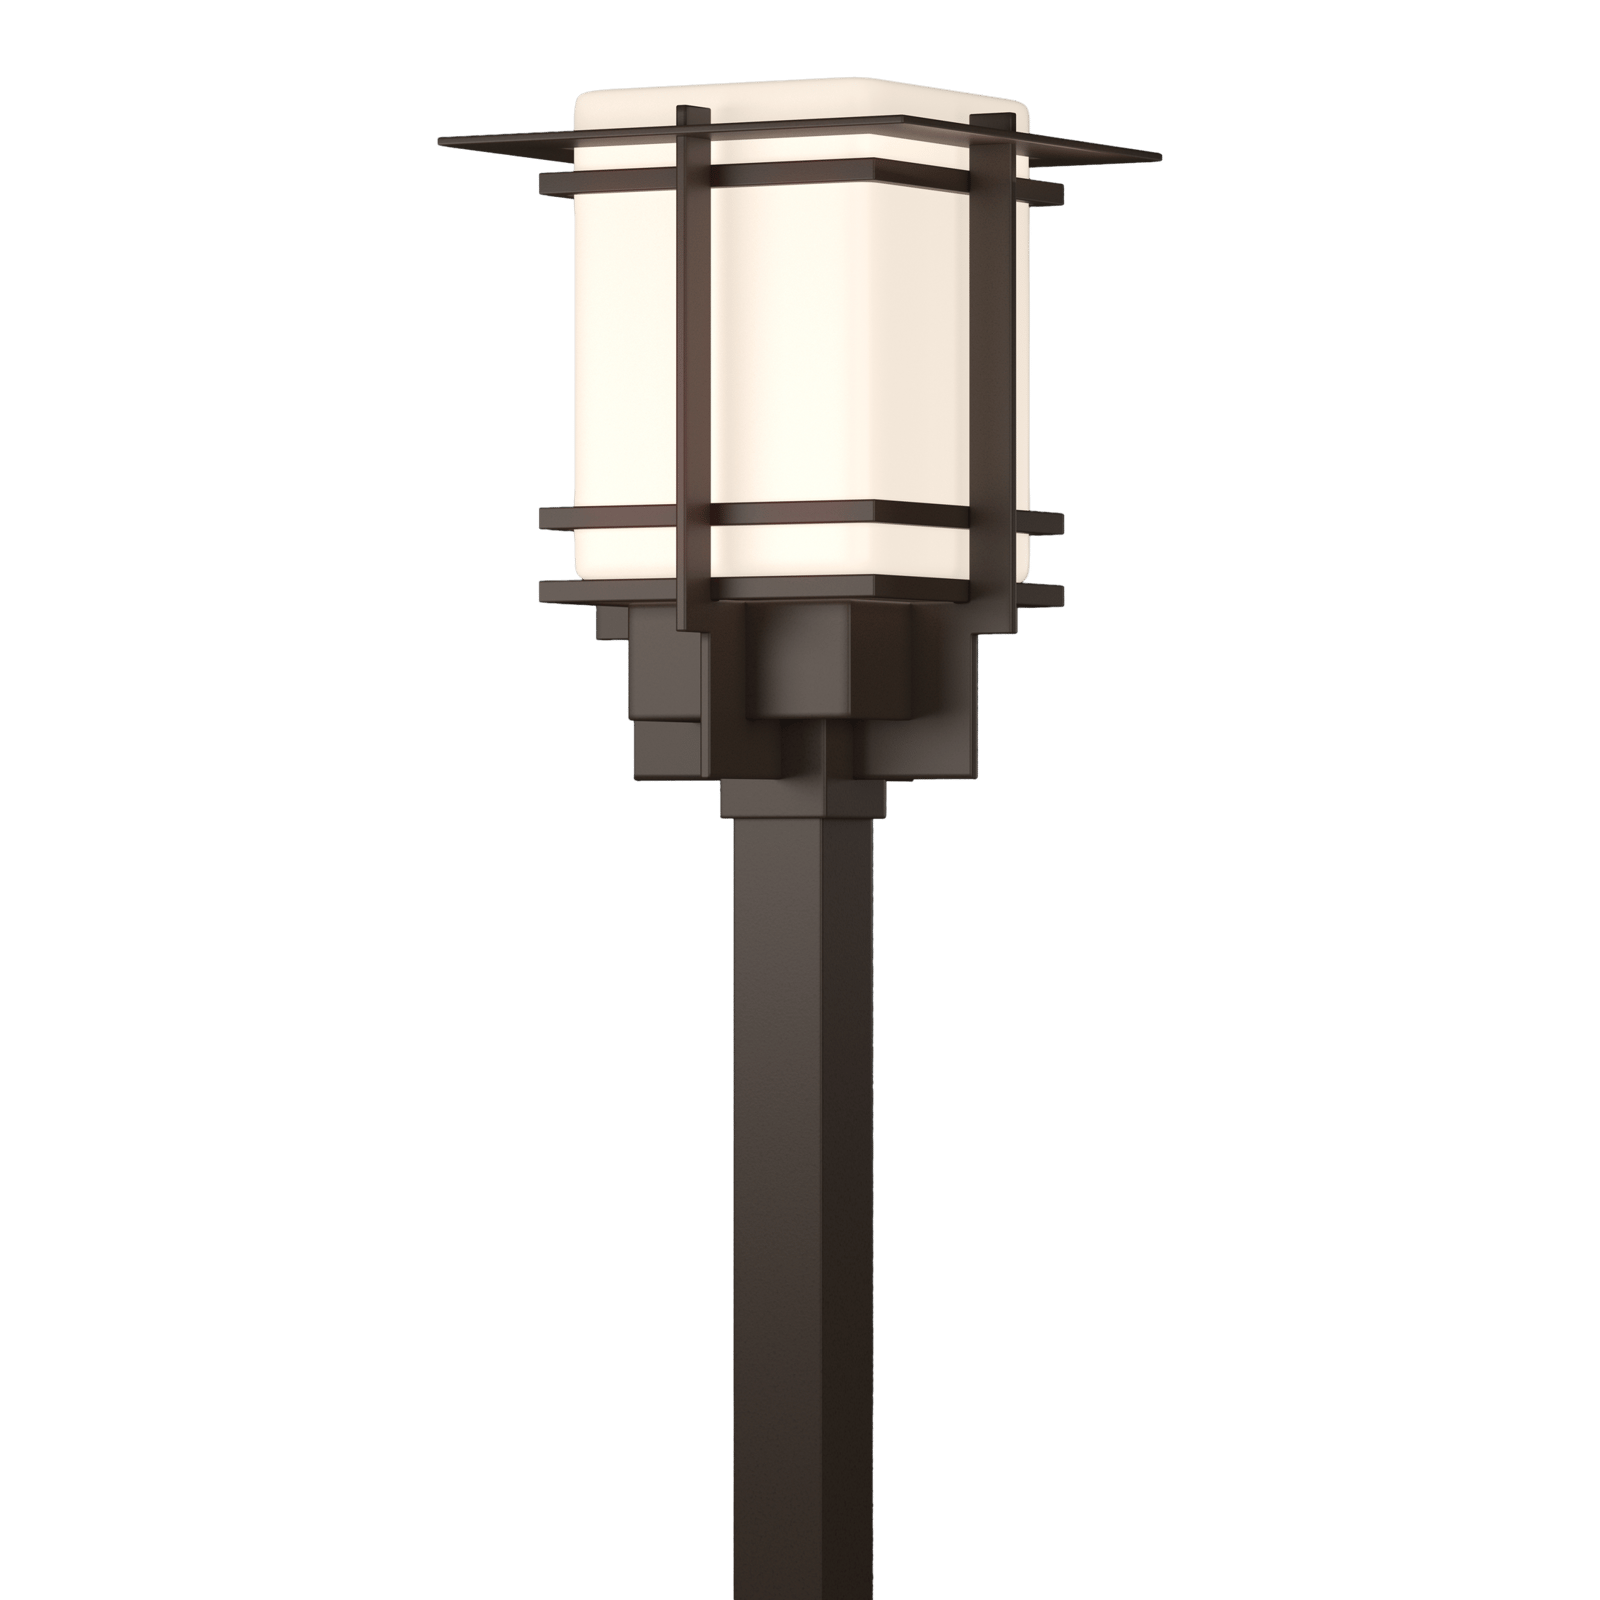 Hubbardton Forge Tourou Large Outdoor Post Light Outdoor l Post/Pier Mounts Hubbardton Forge Coastal Bronze Opal Glass (GG) 